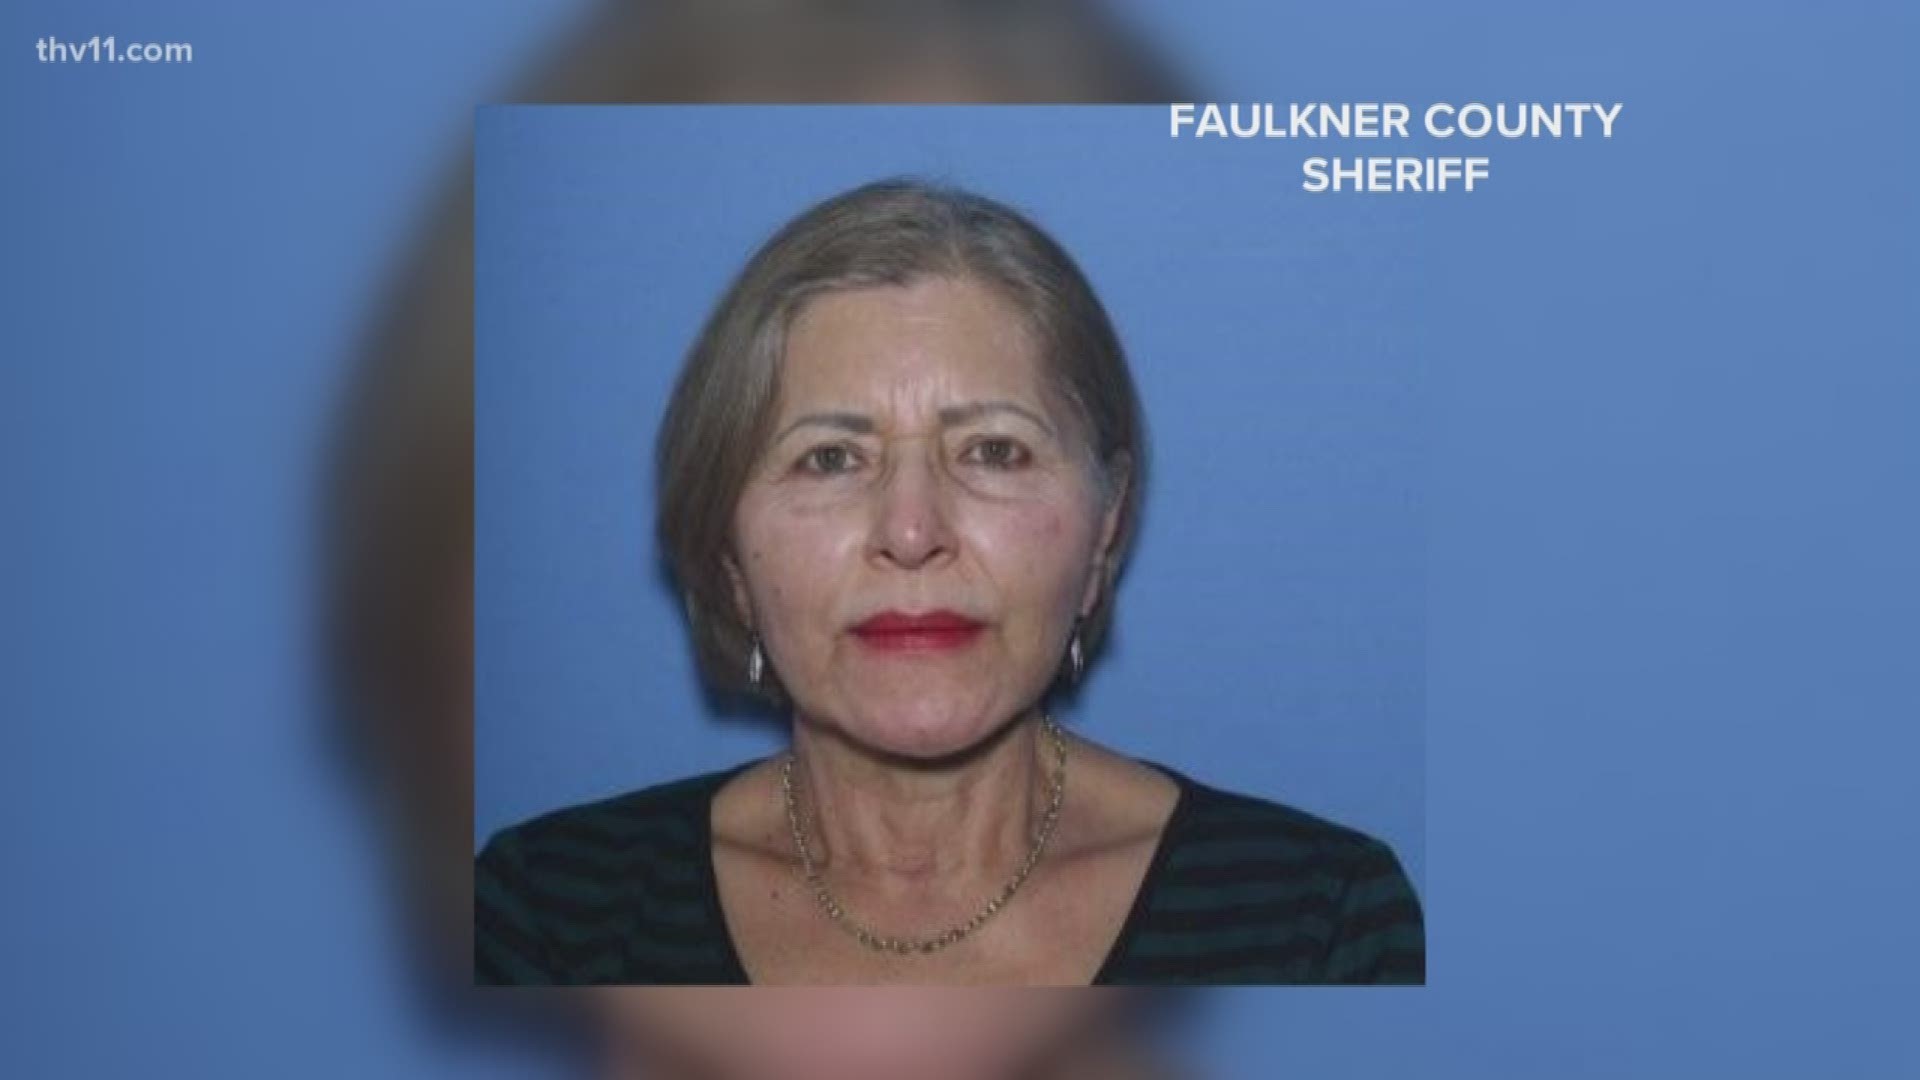 The 71-year-old woman went missing July 7 after going to TJ Maxx in Conway. Her body was later found on the side of the road.